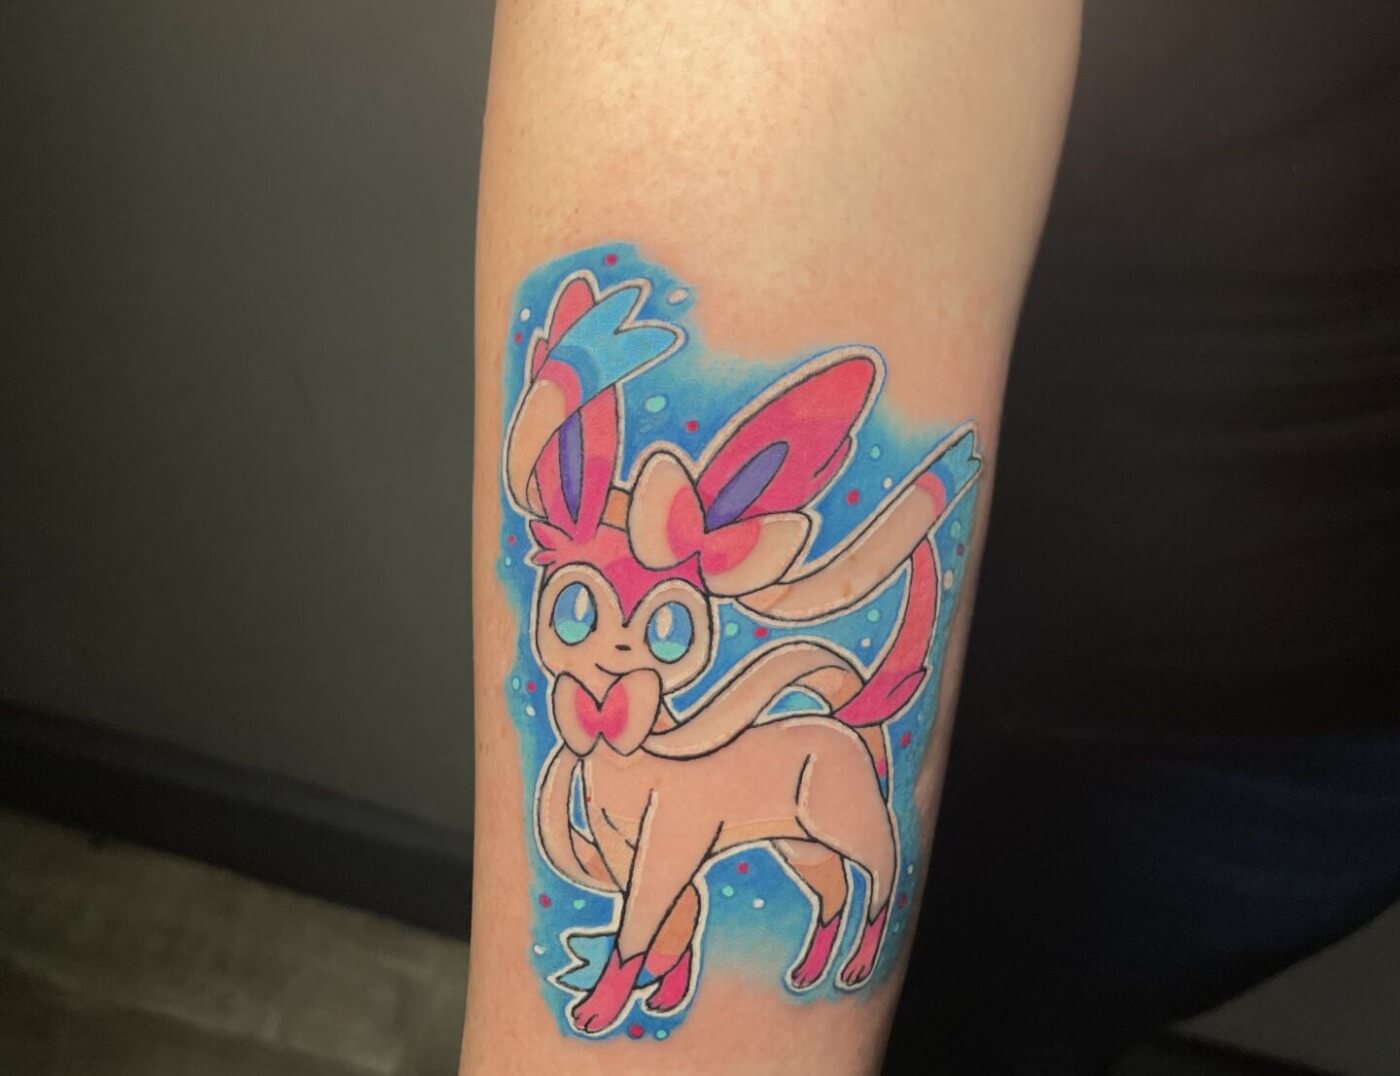 Pokemon color anime tattoo inked by 'Lyric The Artist' at Iron Palm Tattoos in downtown Atlanta, Georgia's castleberry art district. Call 404-973-7828 or stop by for a free consultation.